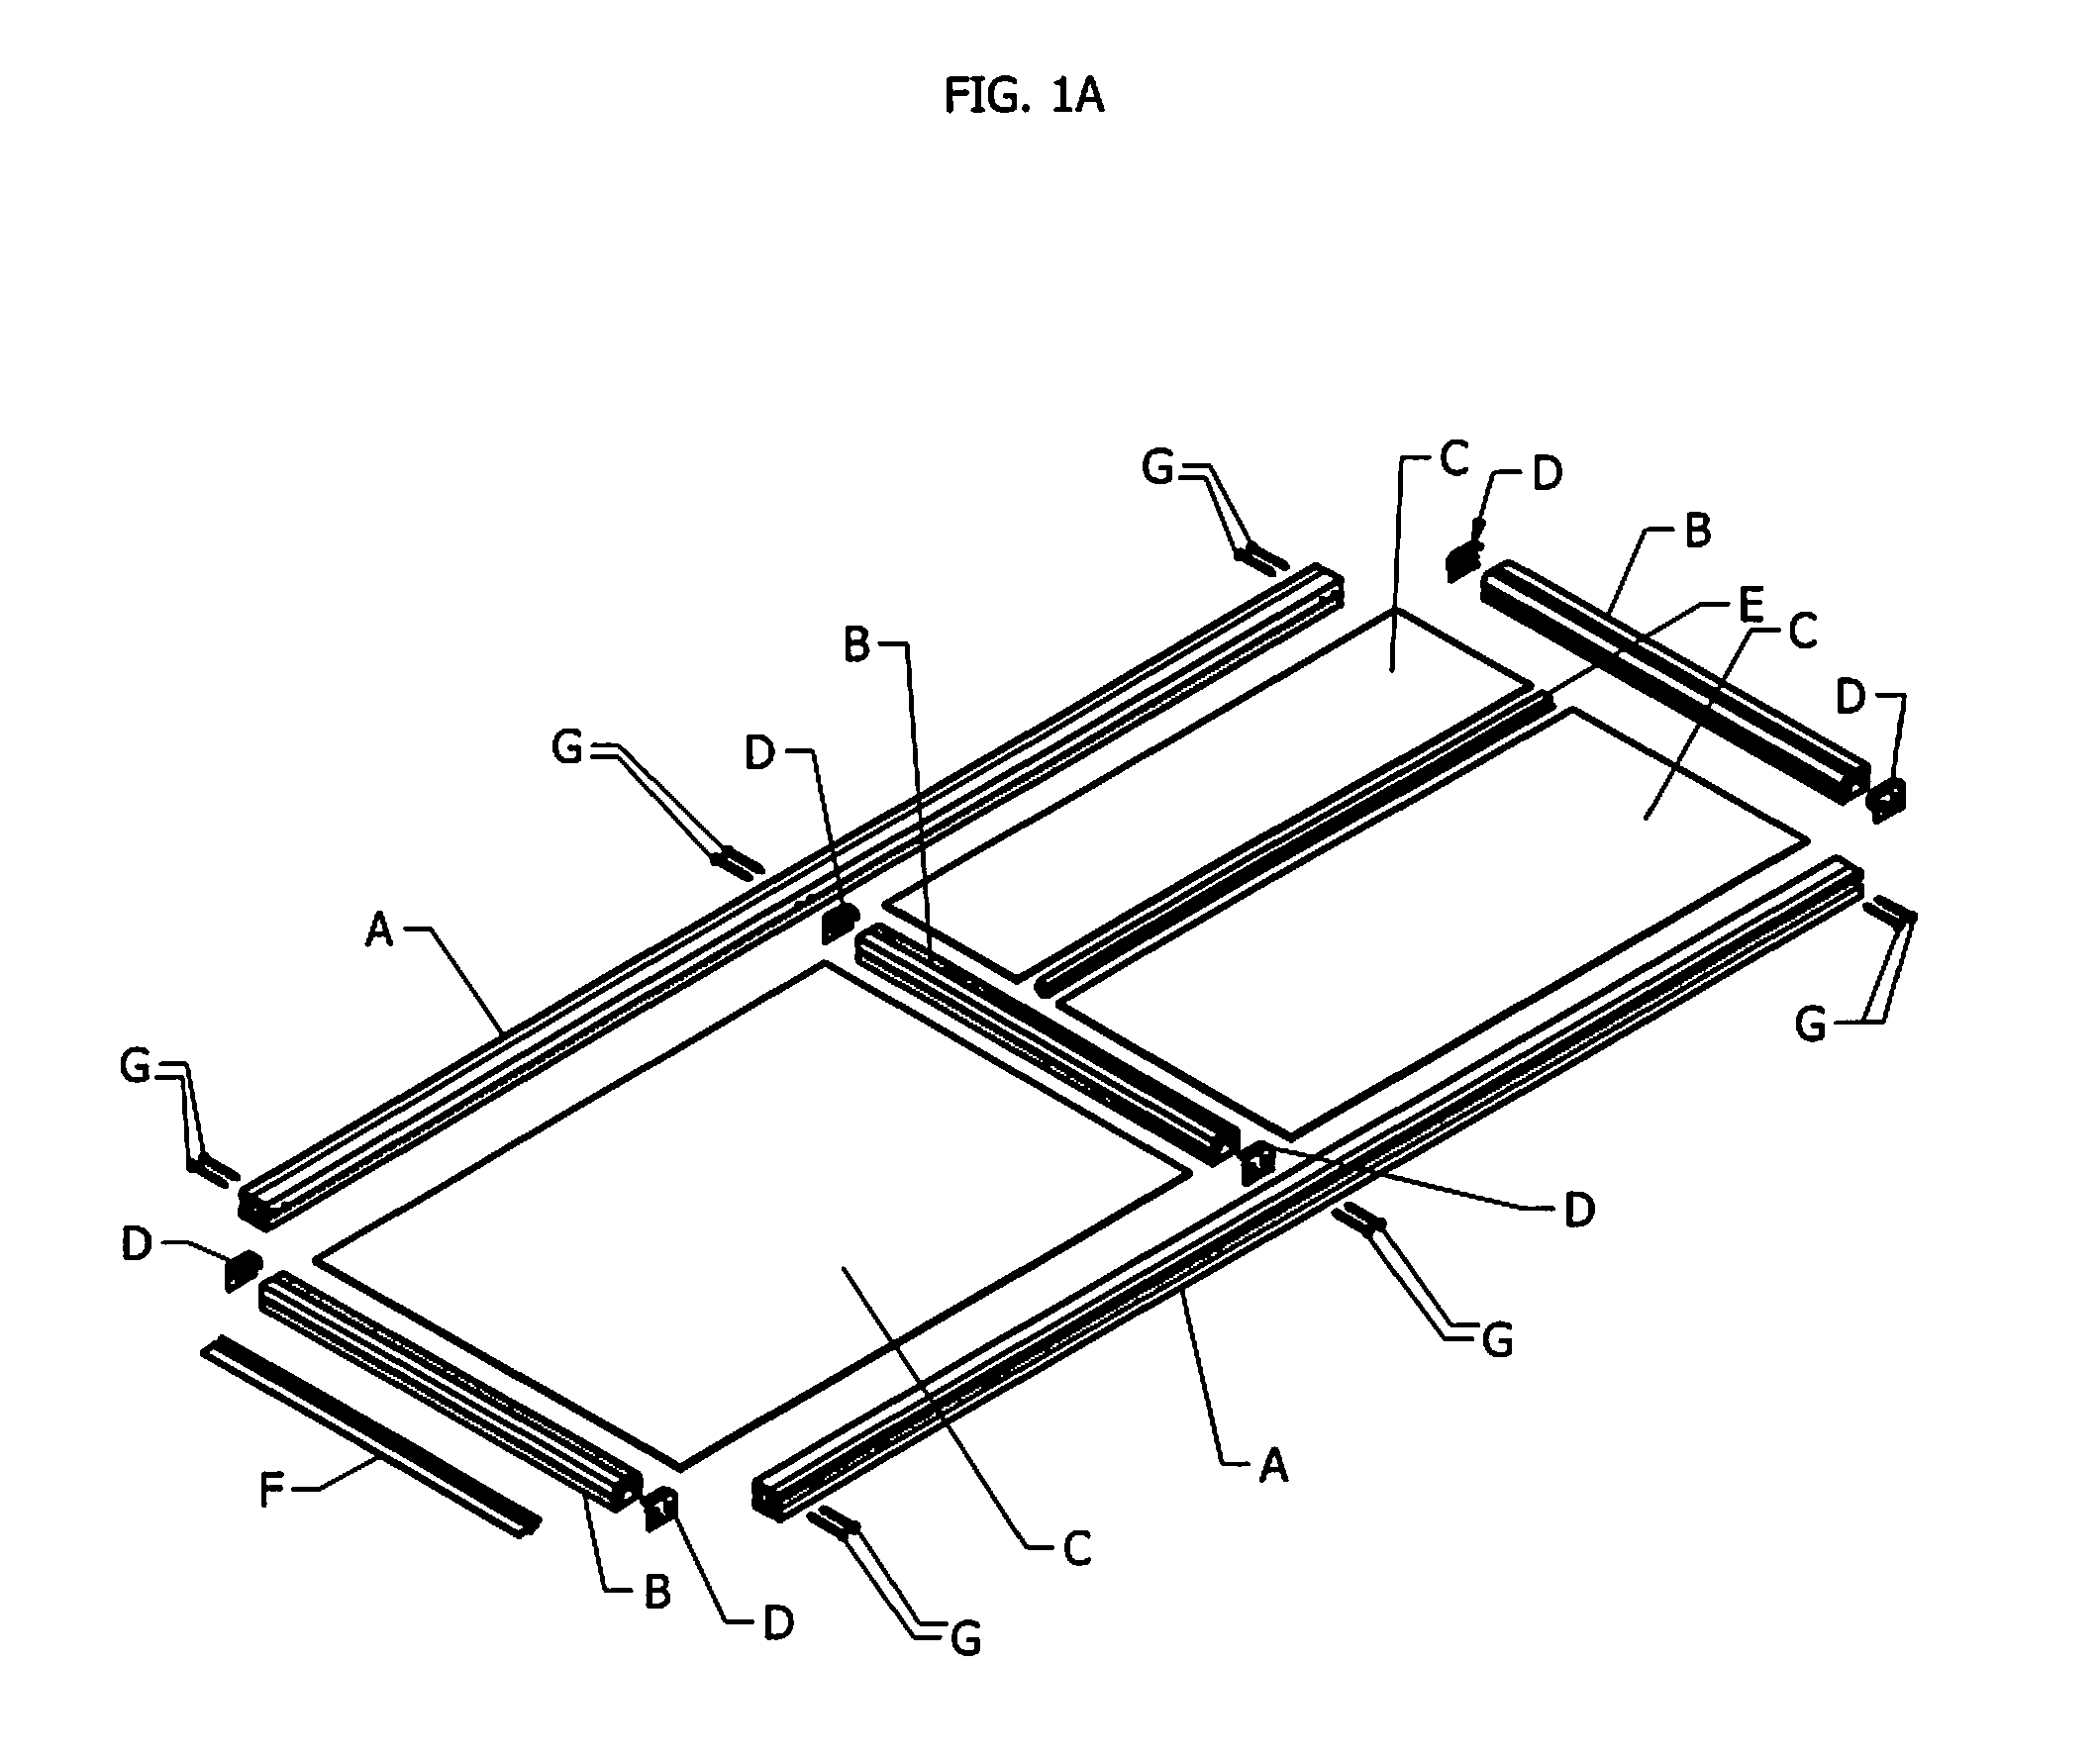 Mountable, Demountable and Adjustable by the User Screen Comprising a Frame Assembly Having Connectors and Rigid or Semi-Rigid Panels Within the Framework